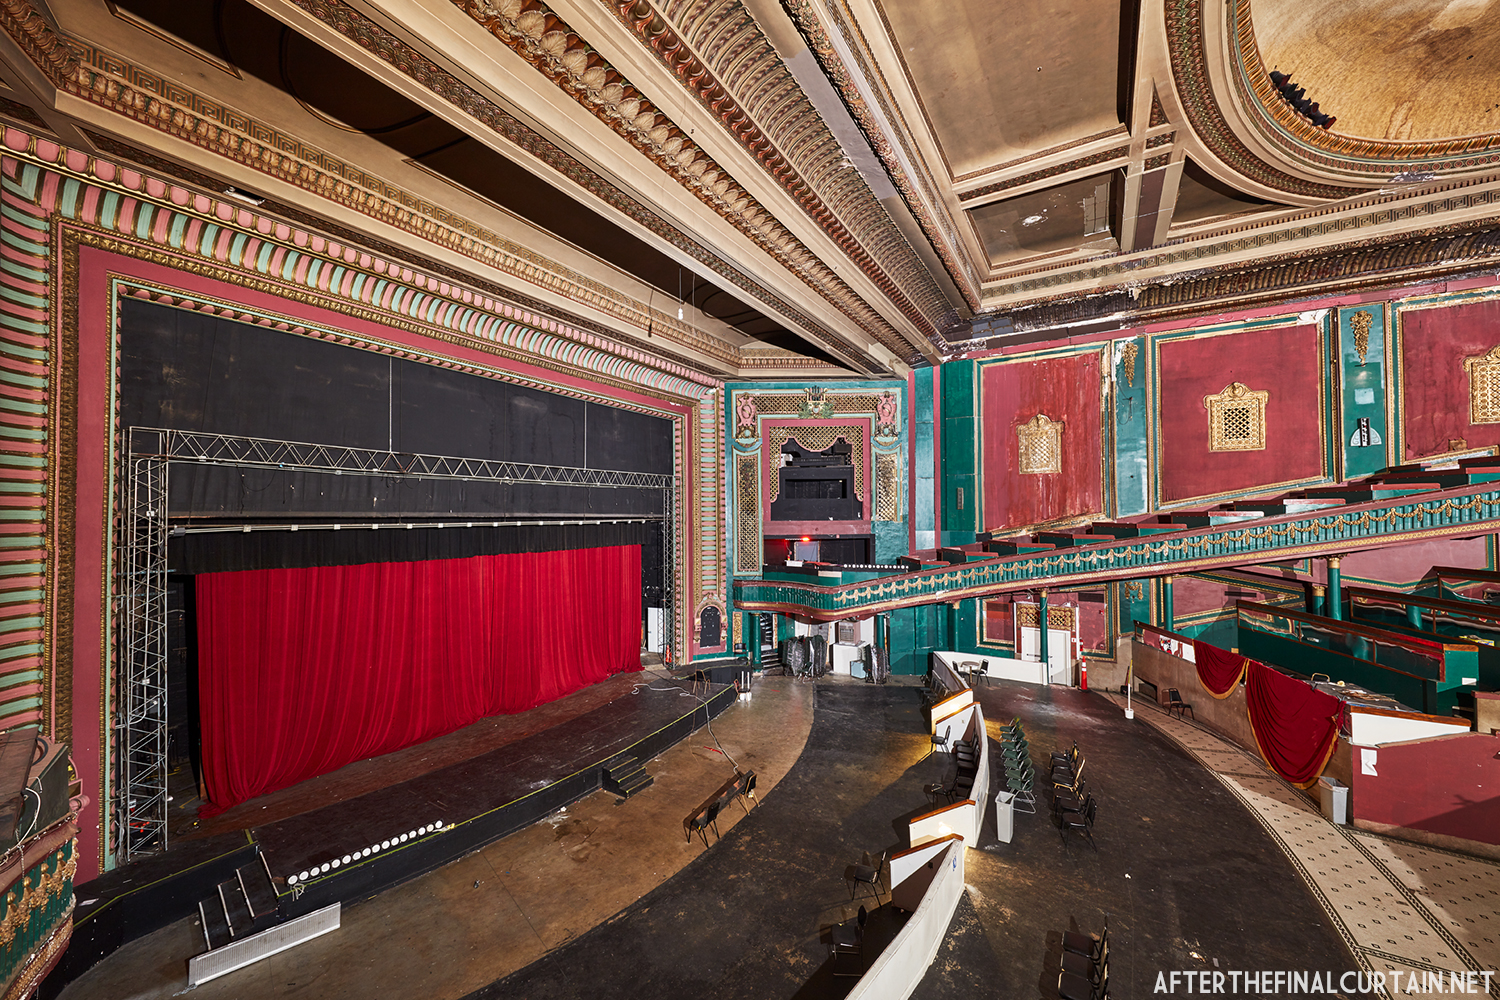 State Theatre – South Bend, Indiana | After the Final Curtain